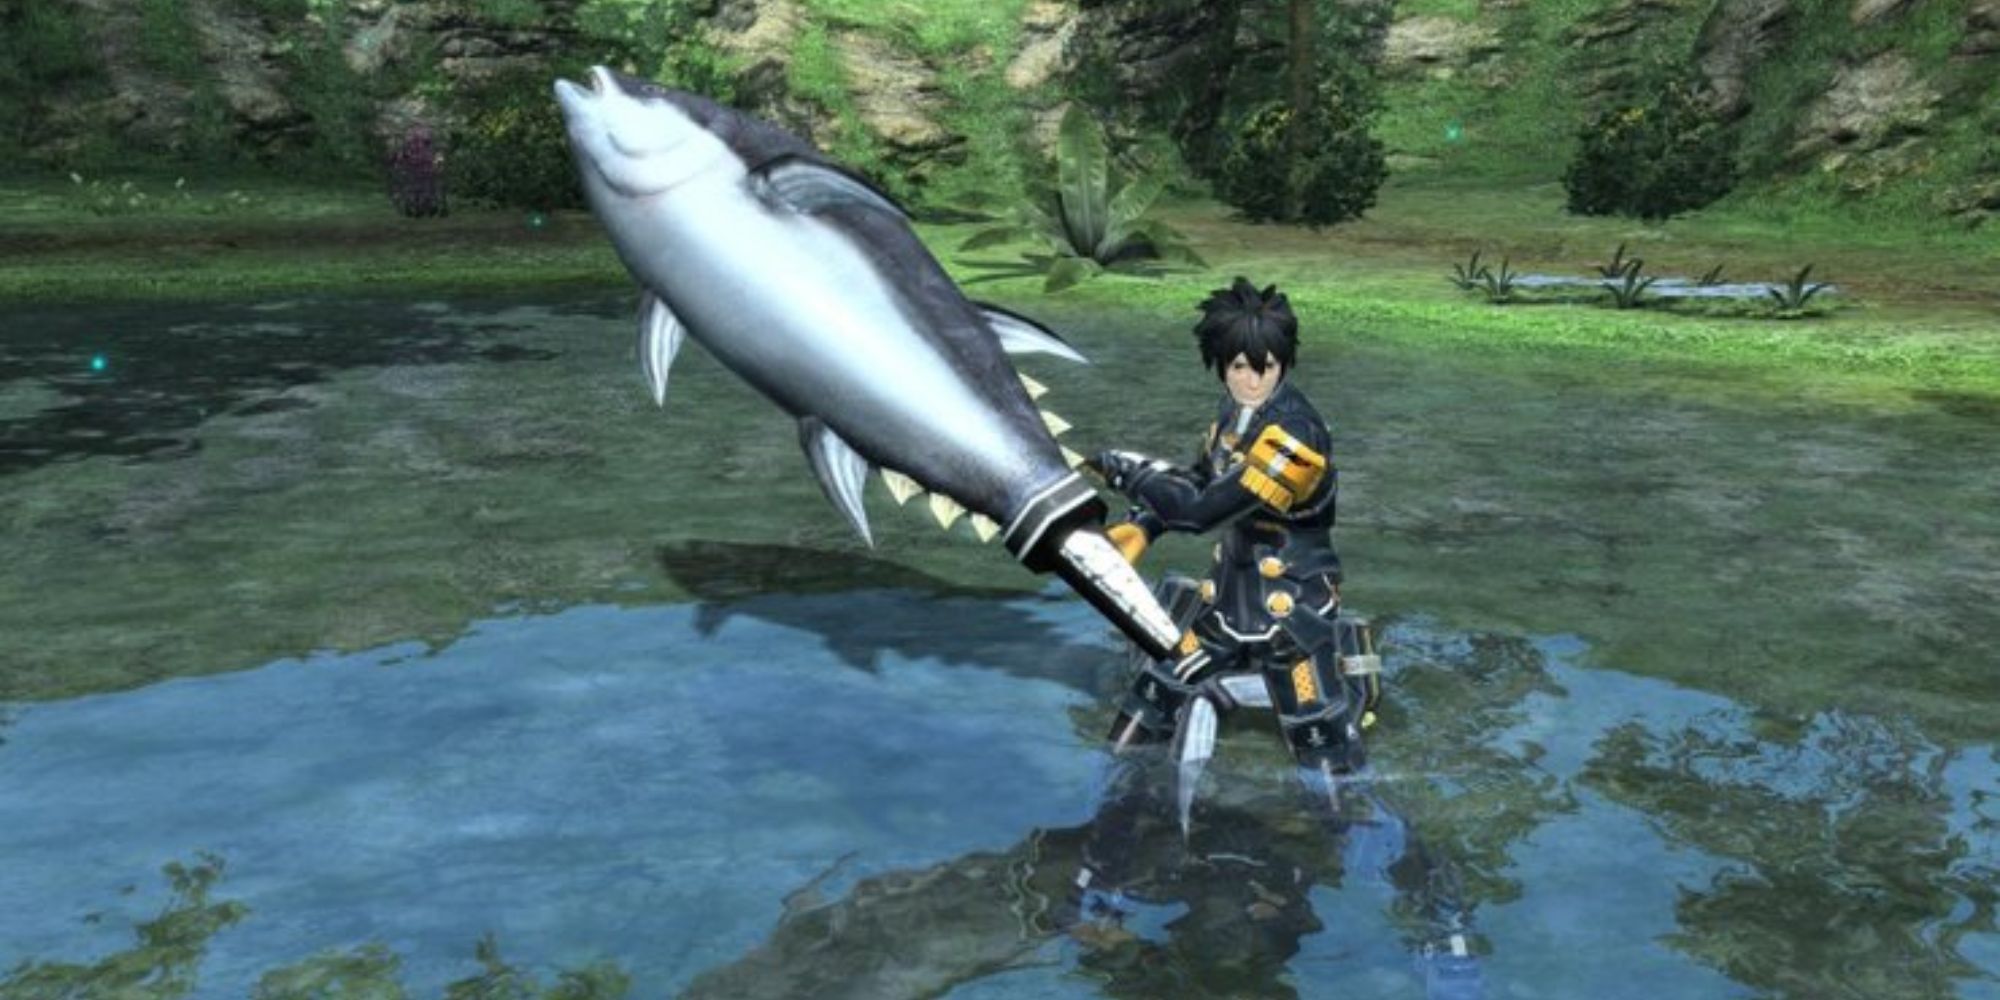 A tuna sword wielded by a Phantasy Star Online character